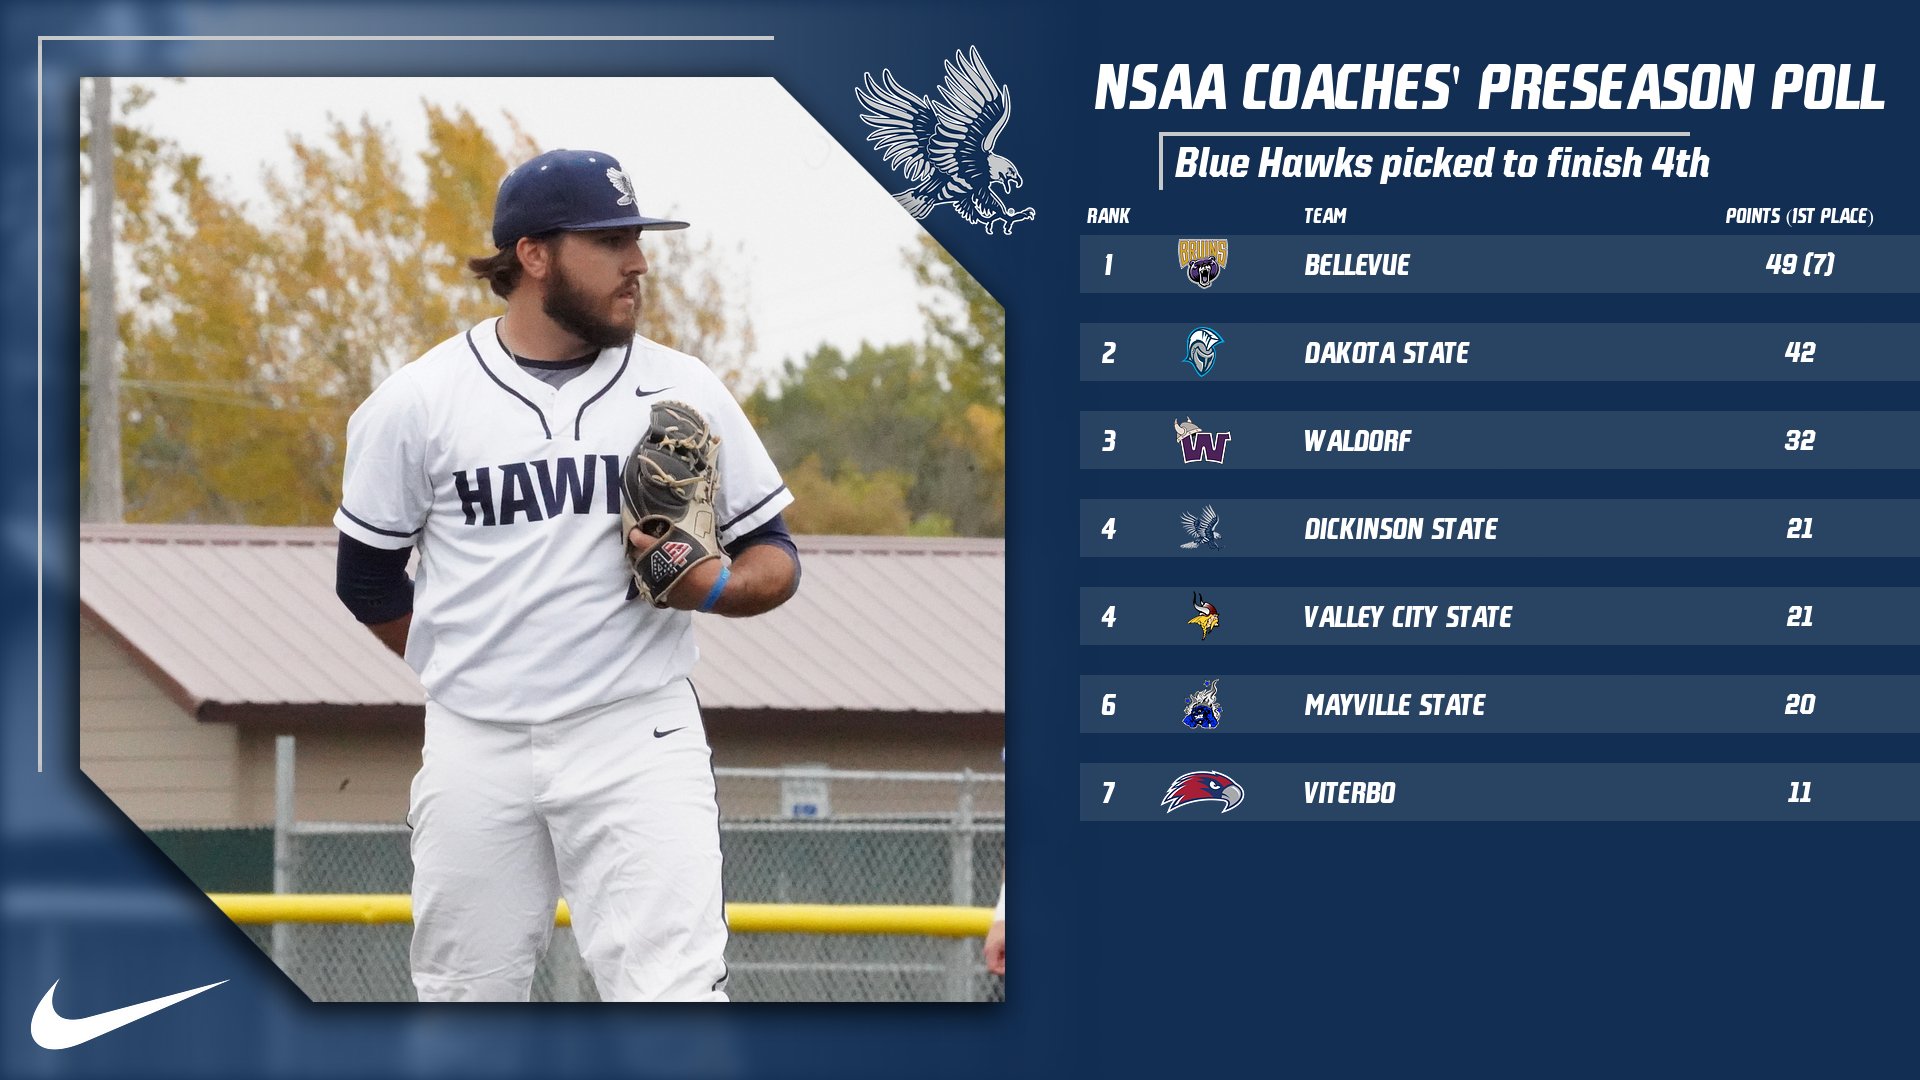 Blue Hawks tabbed for fourth place in NSAA Coaches' Preseason Poll